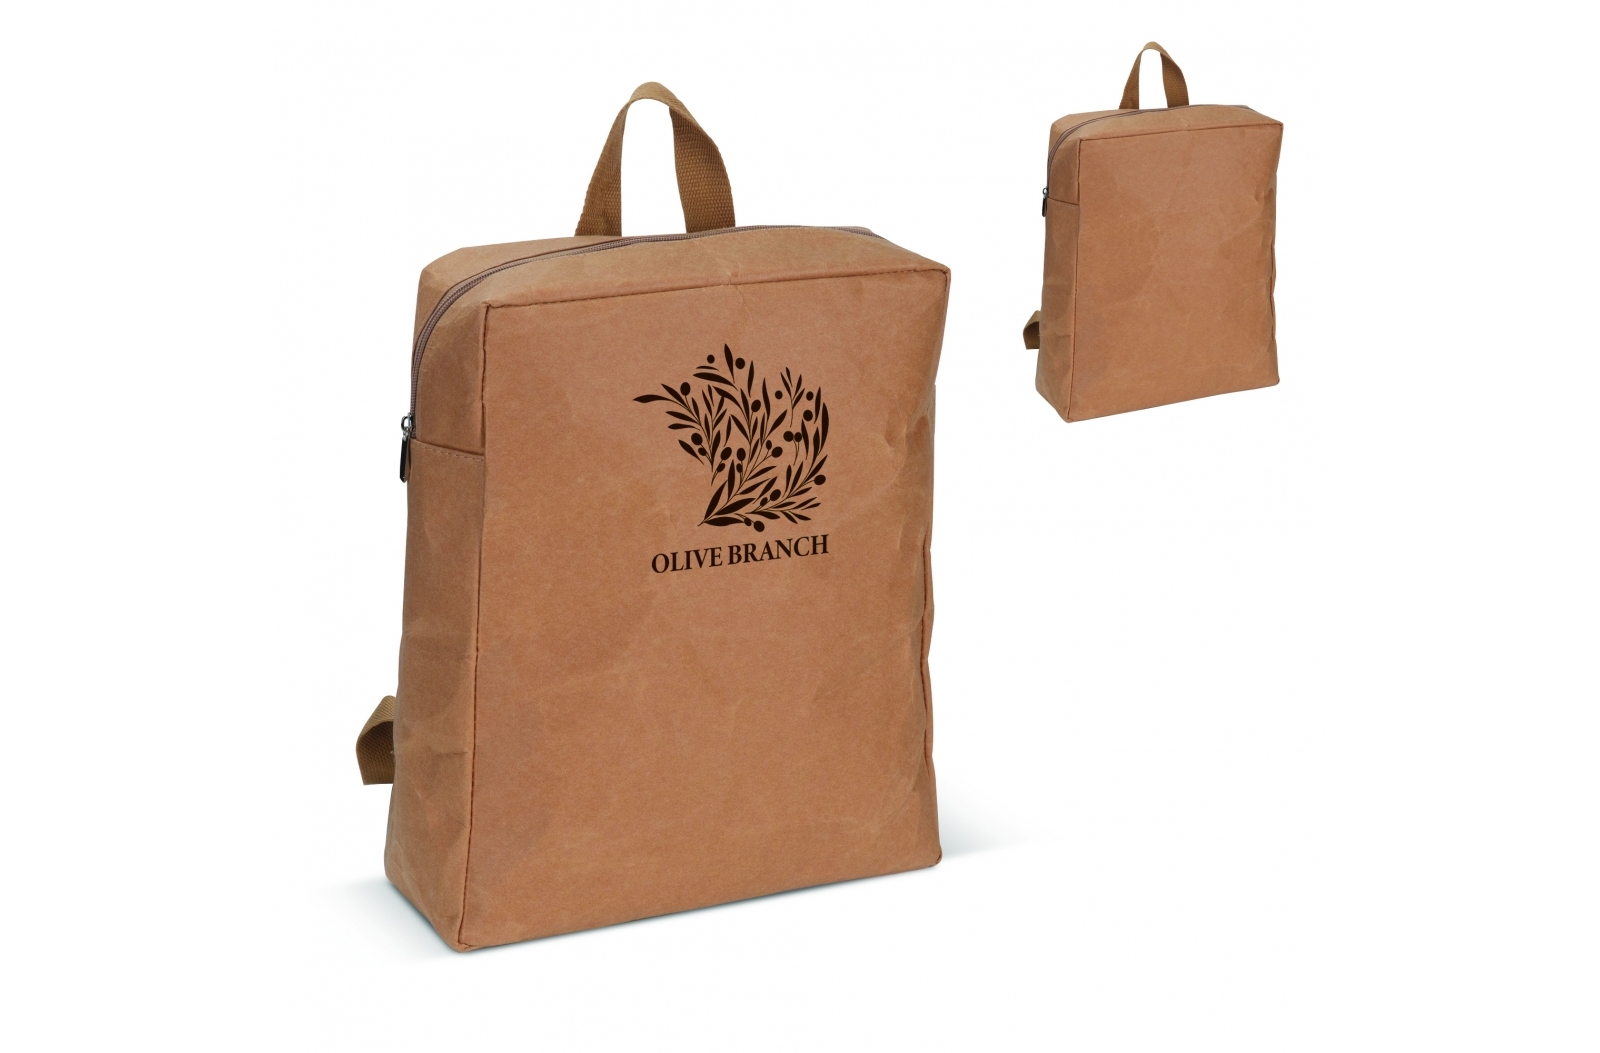 A backpack made of kraft paper that is washable - Newburyport